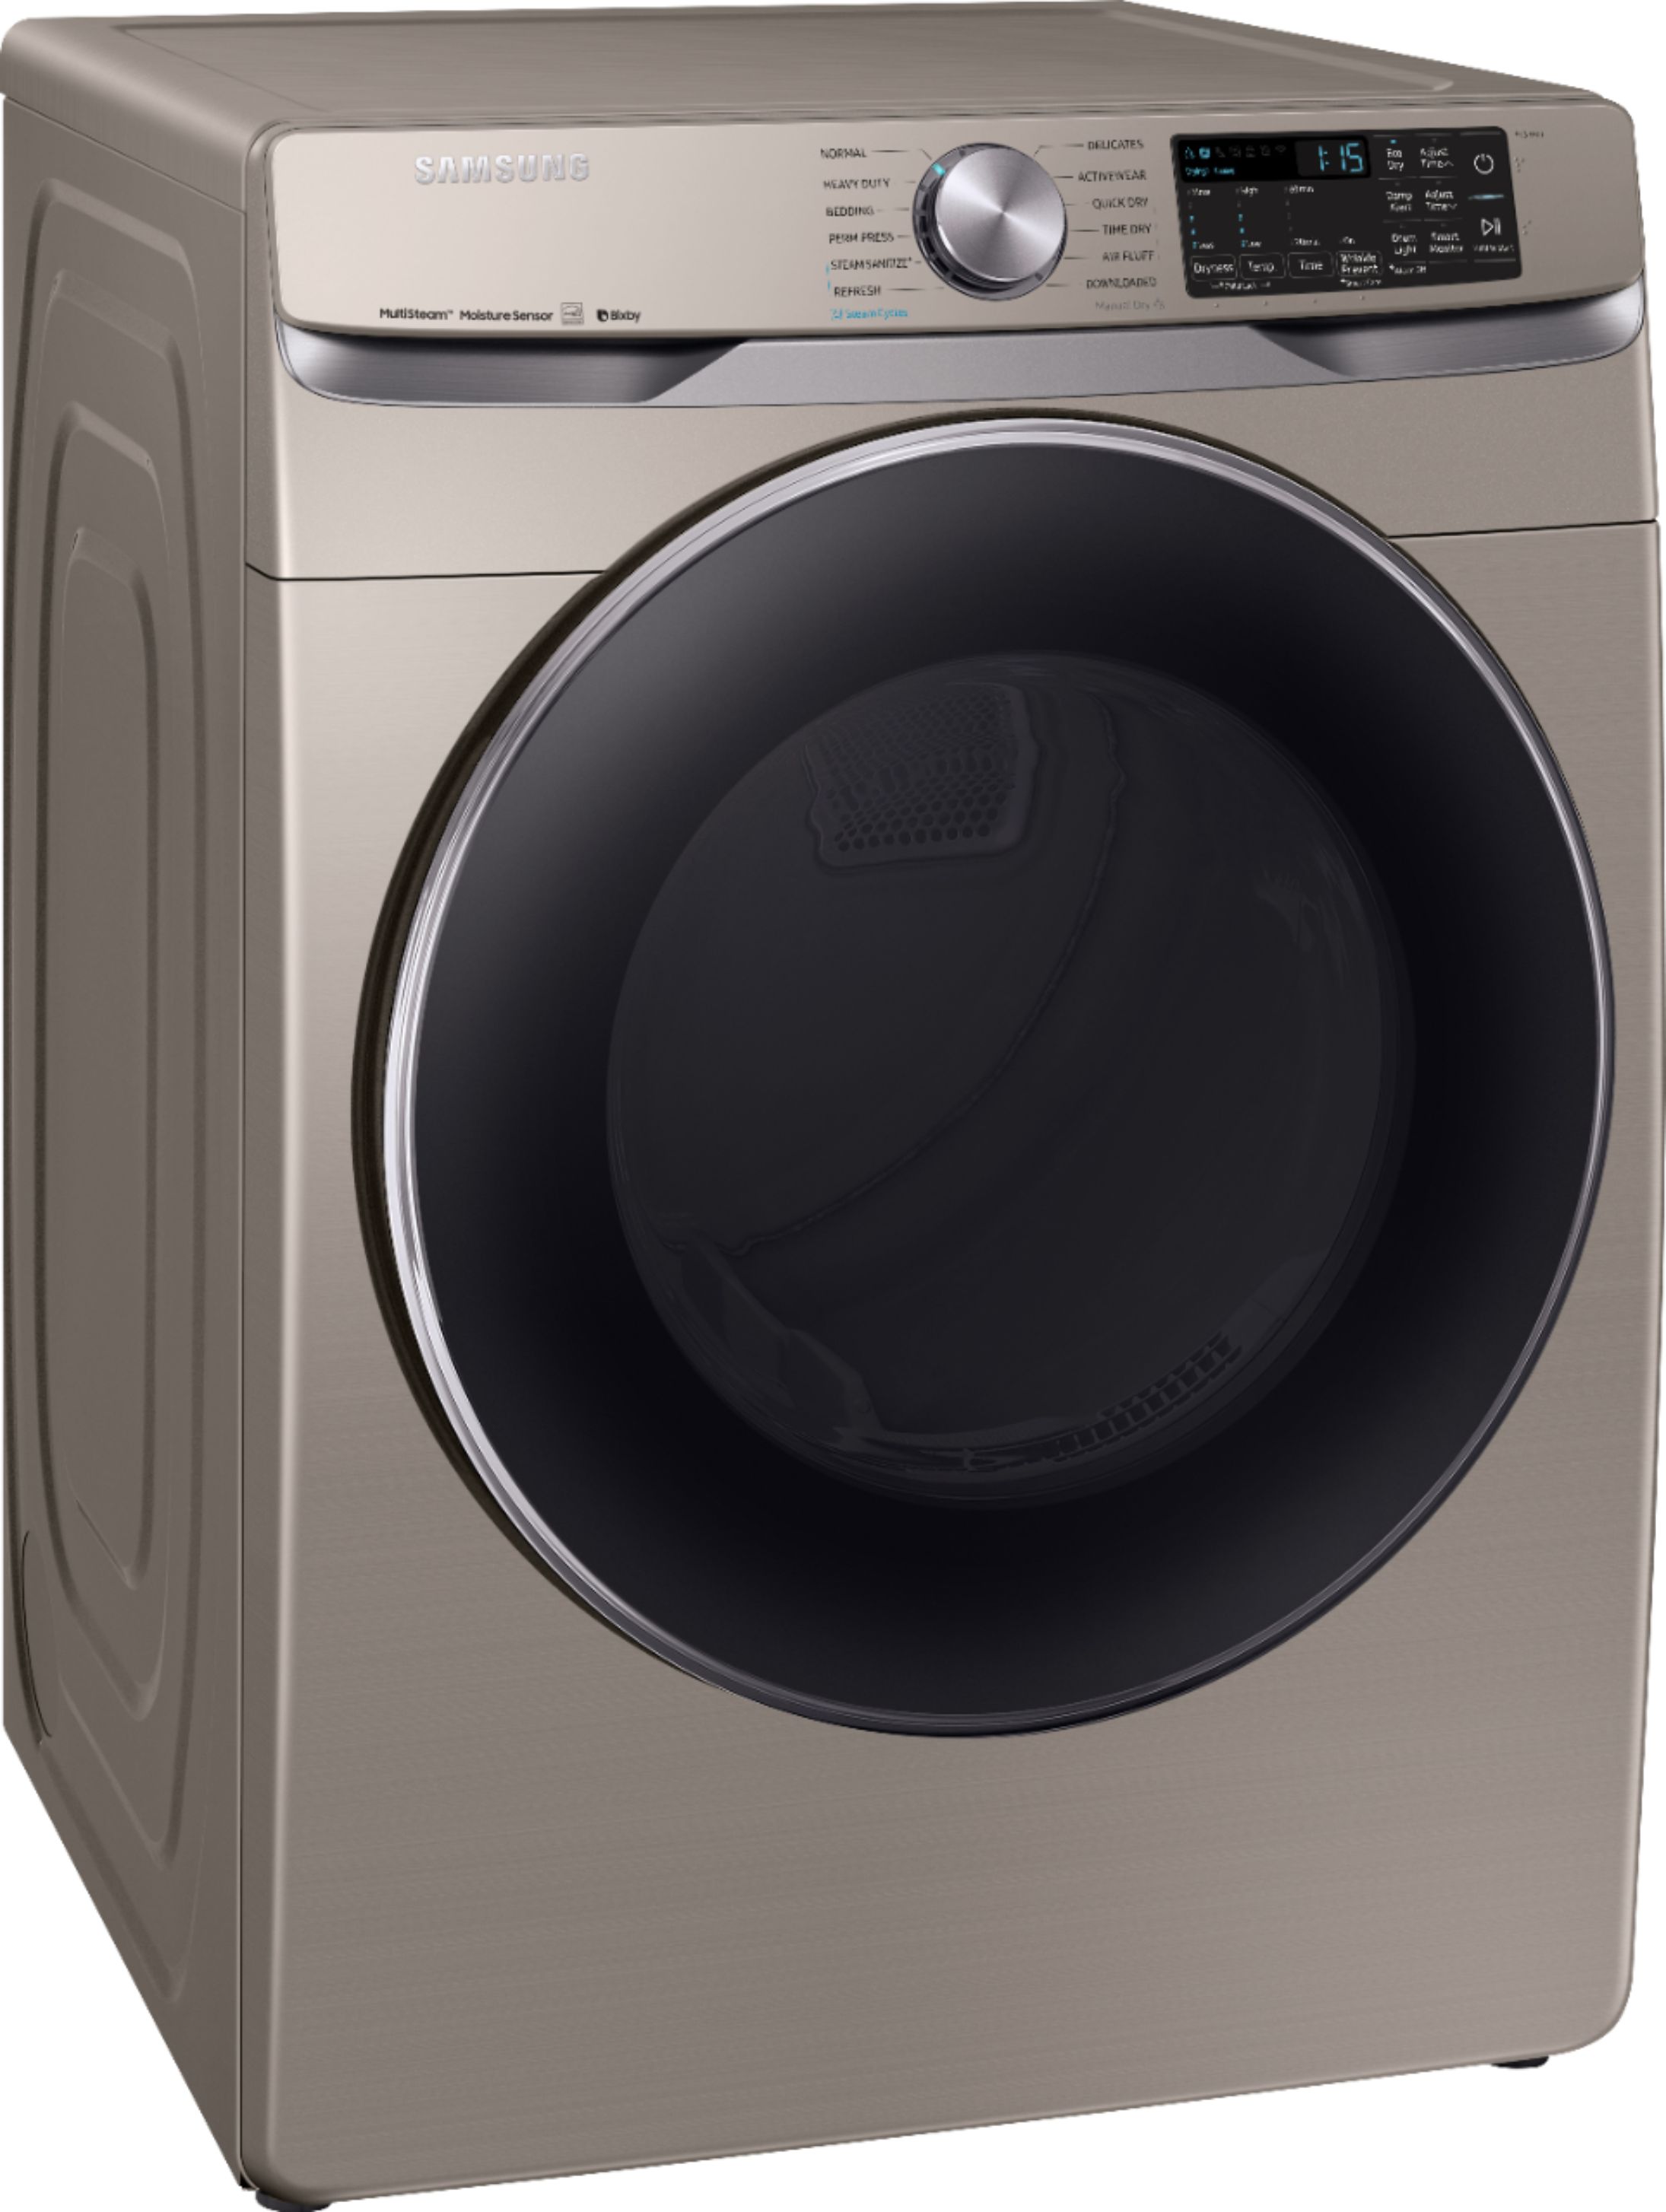 Samsung 7 5 Cu Ft Stackable Smart Electric Dryer With Steam Sanitize And Sensor Dry Champagne Dve45r6300c Best Buy